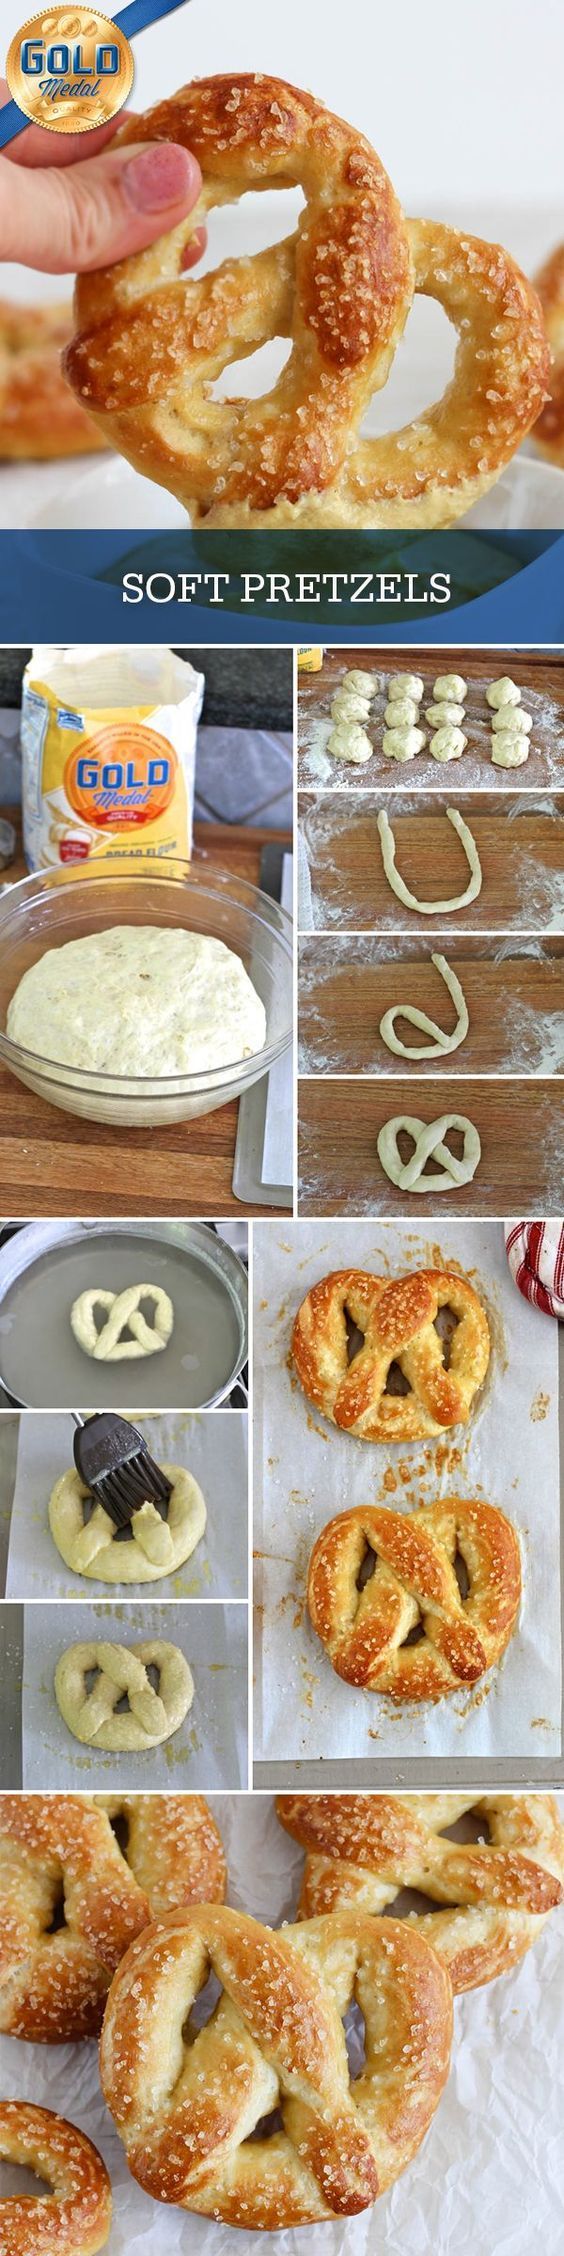 Super soft pretzels with a salty crust that are easy to make and better than the ones you’ll buy at the mall or a ballpark…